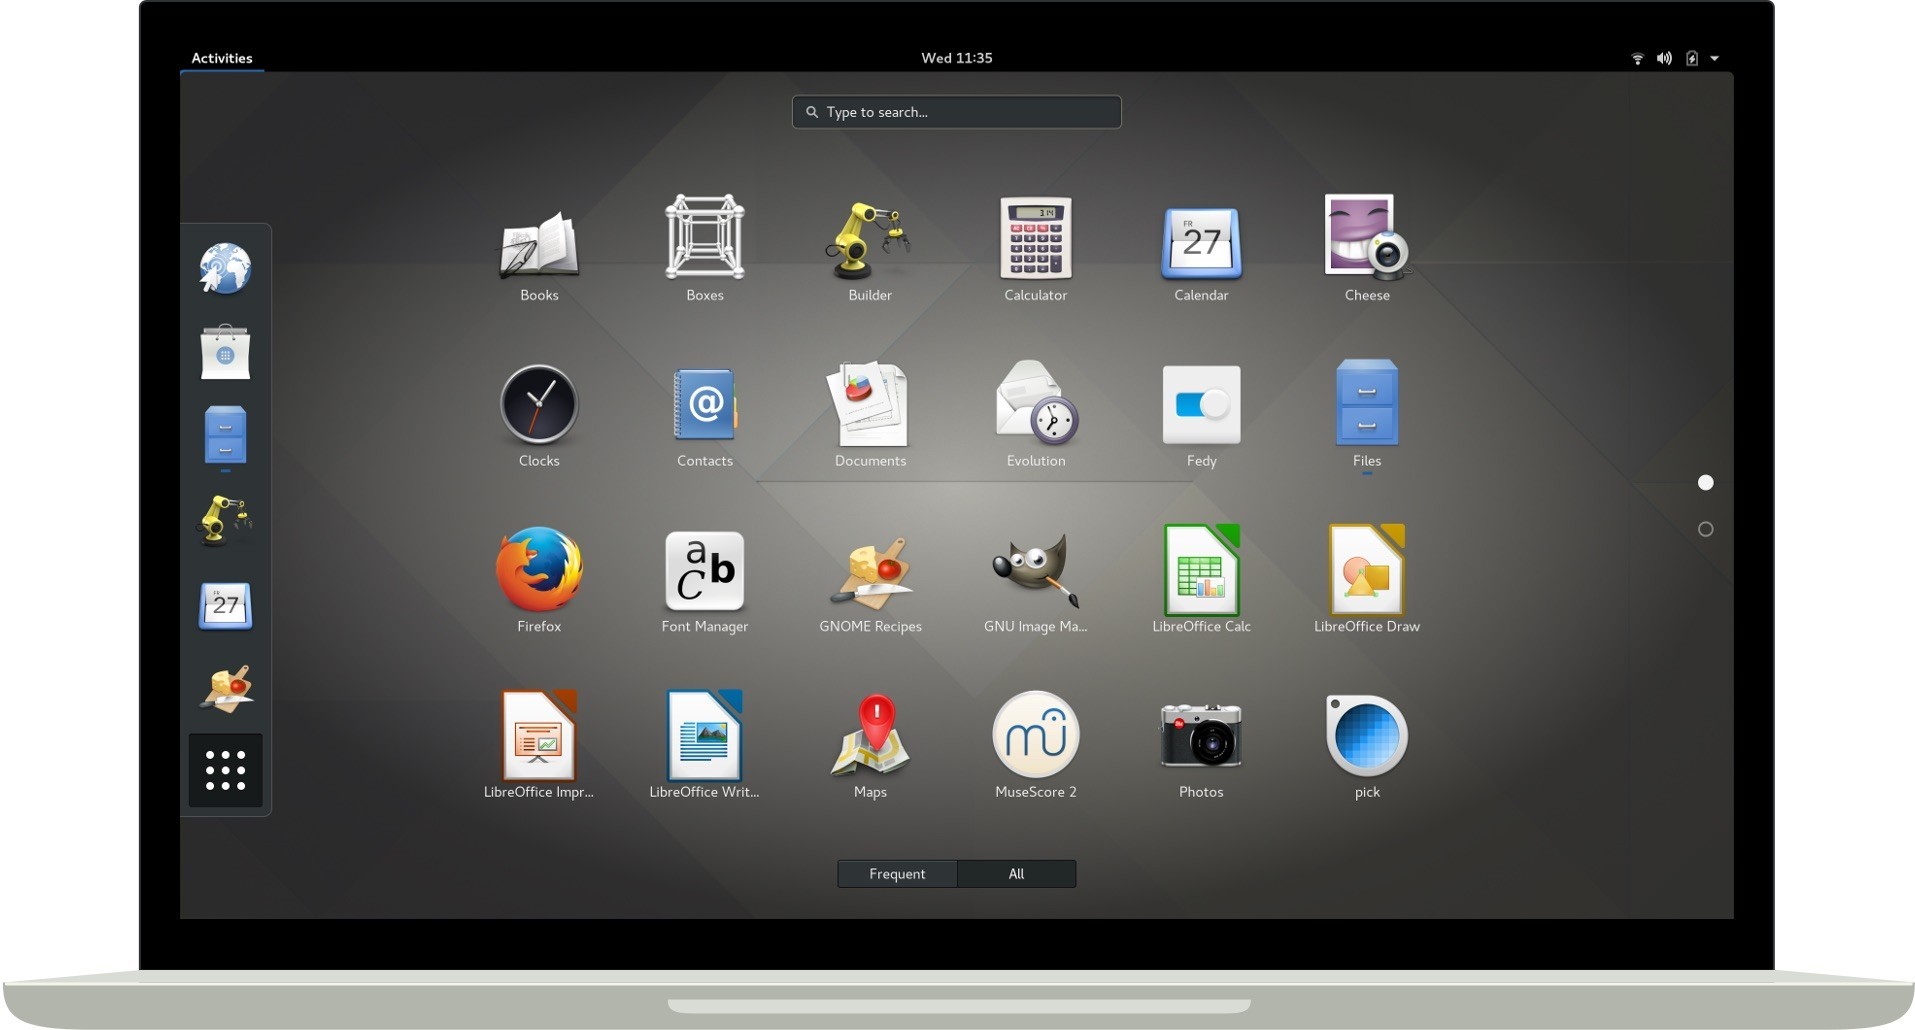 gnome-3-28-2-released-with-memory-leak-fixes-for-gnome-shell-update-now-521088-2.jpg